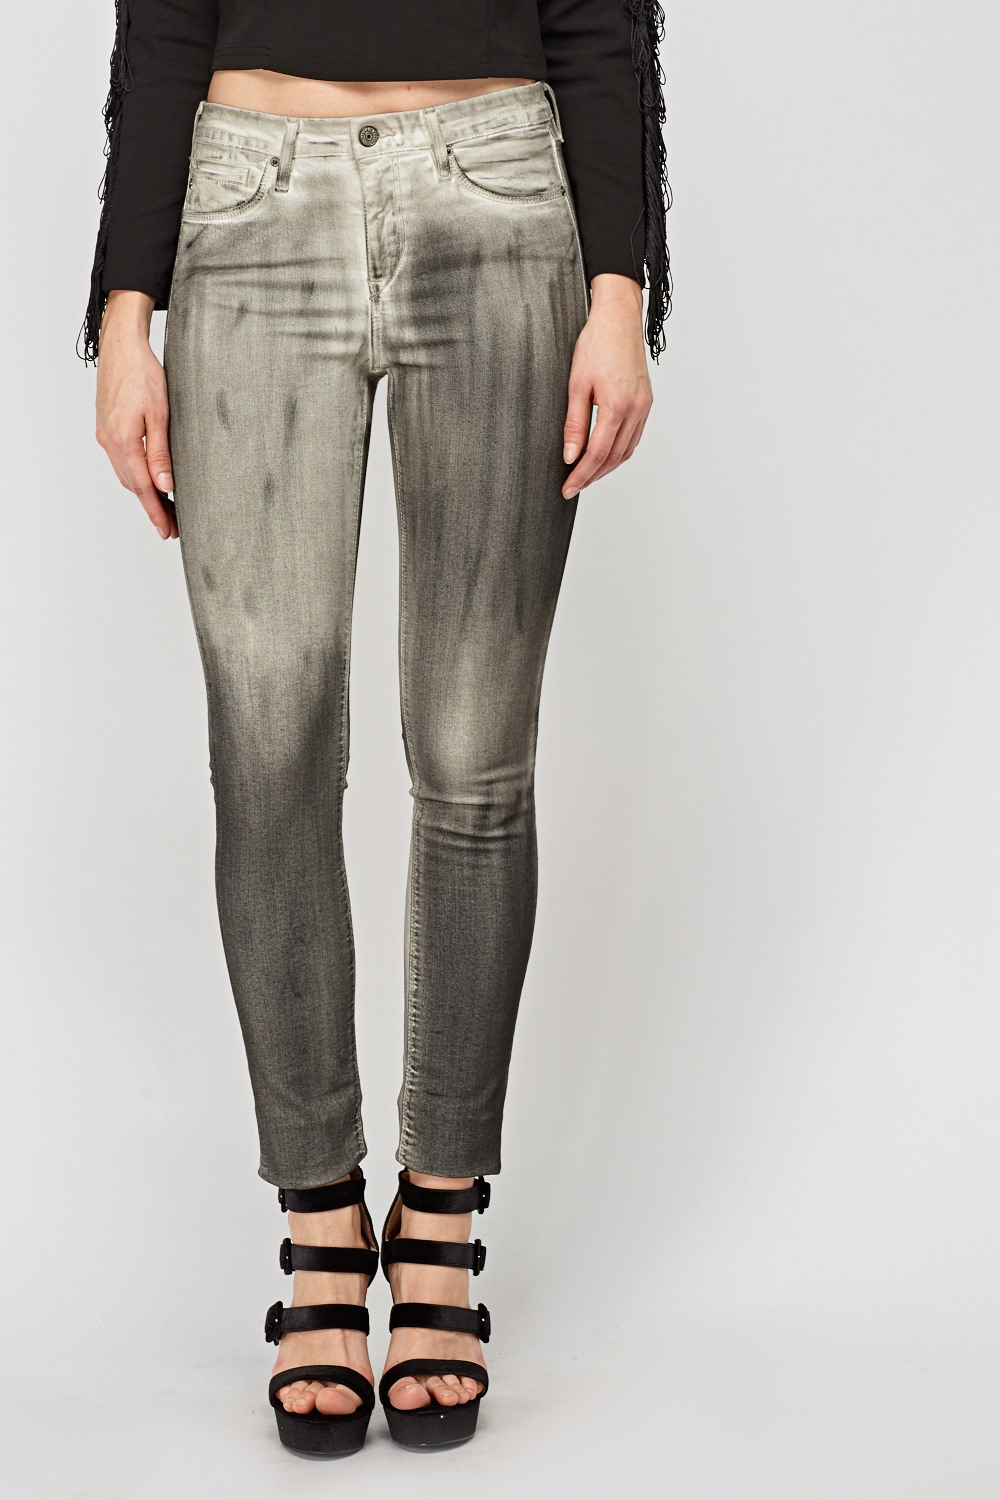 Spray On Washed Charcoal Jeans - Just $7